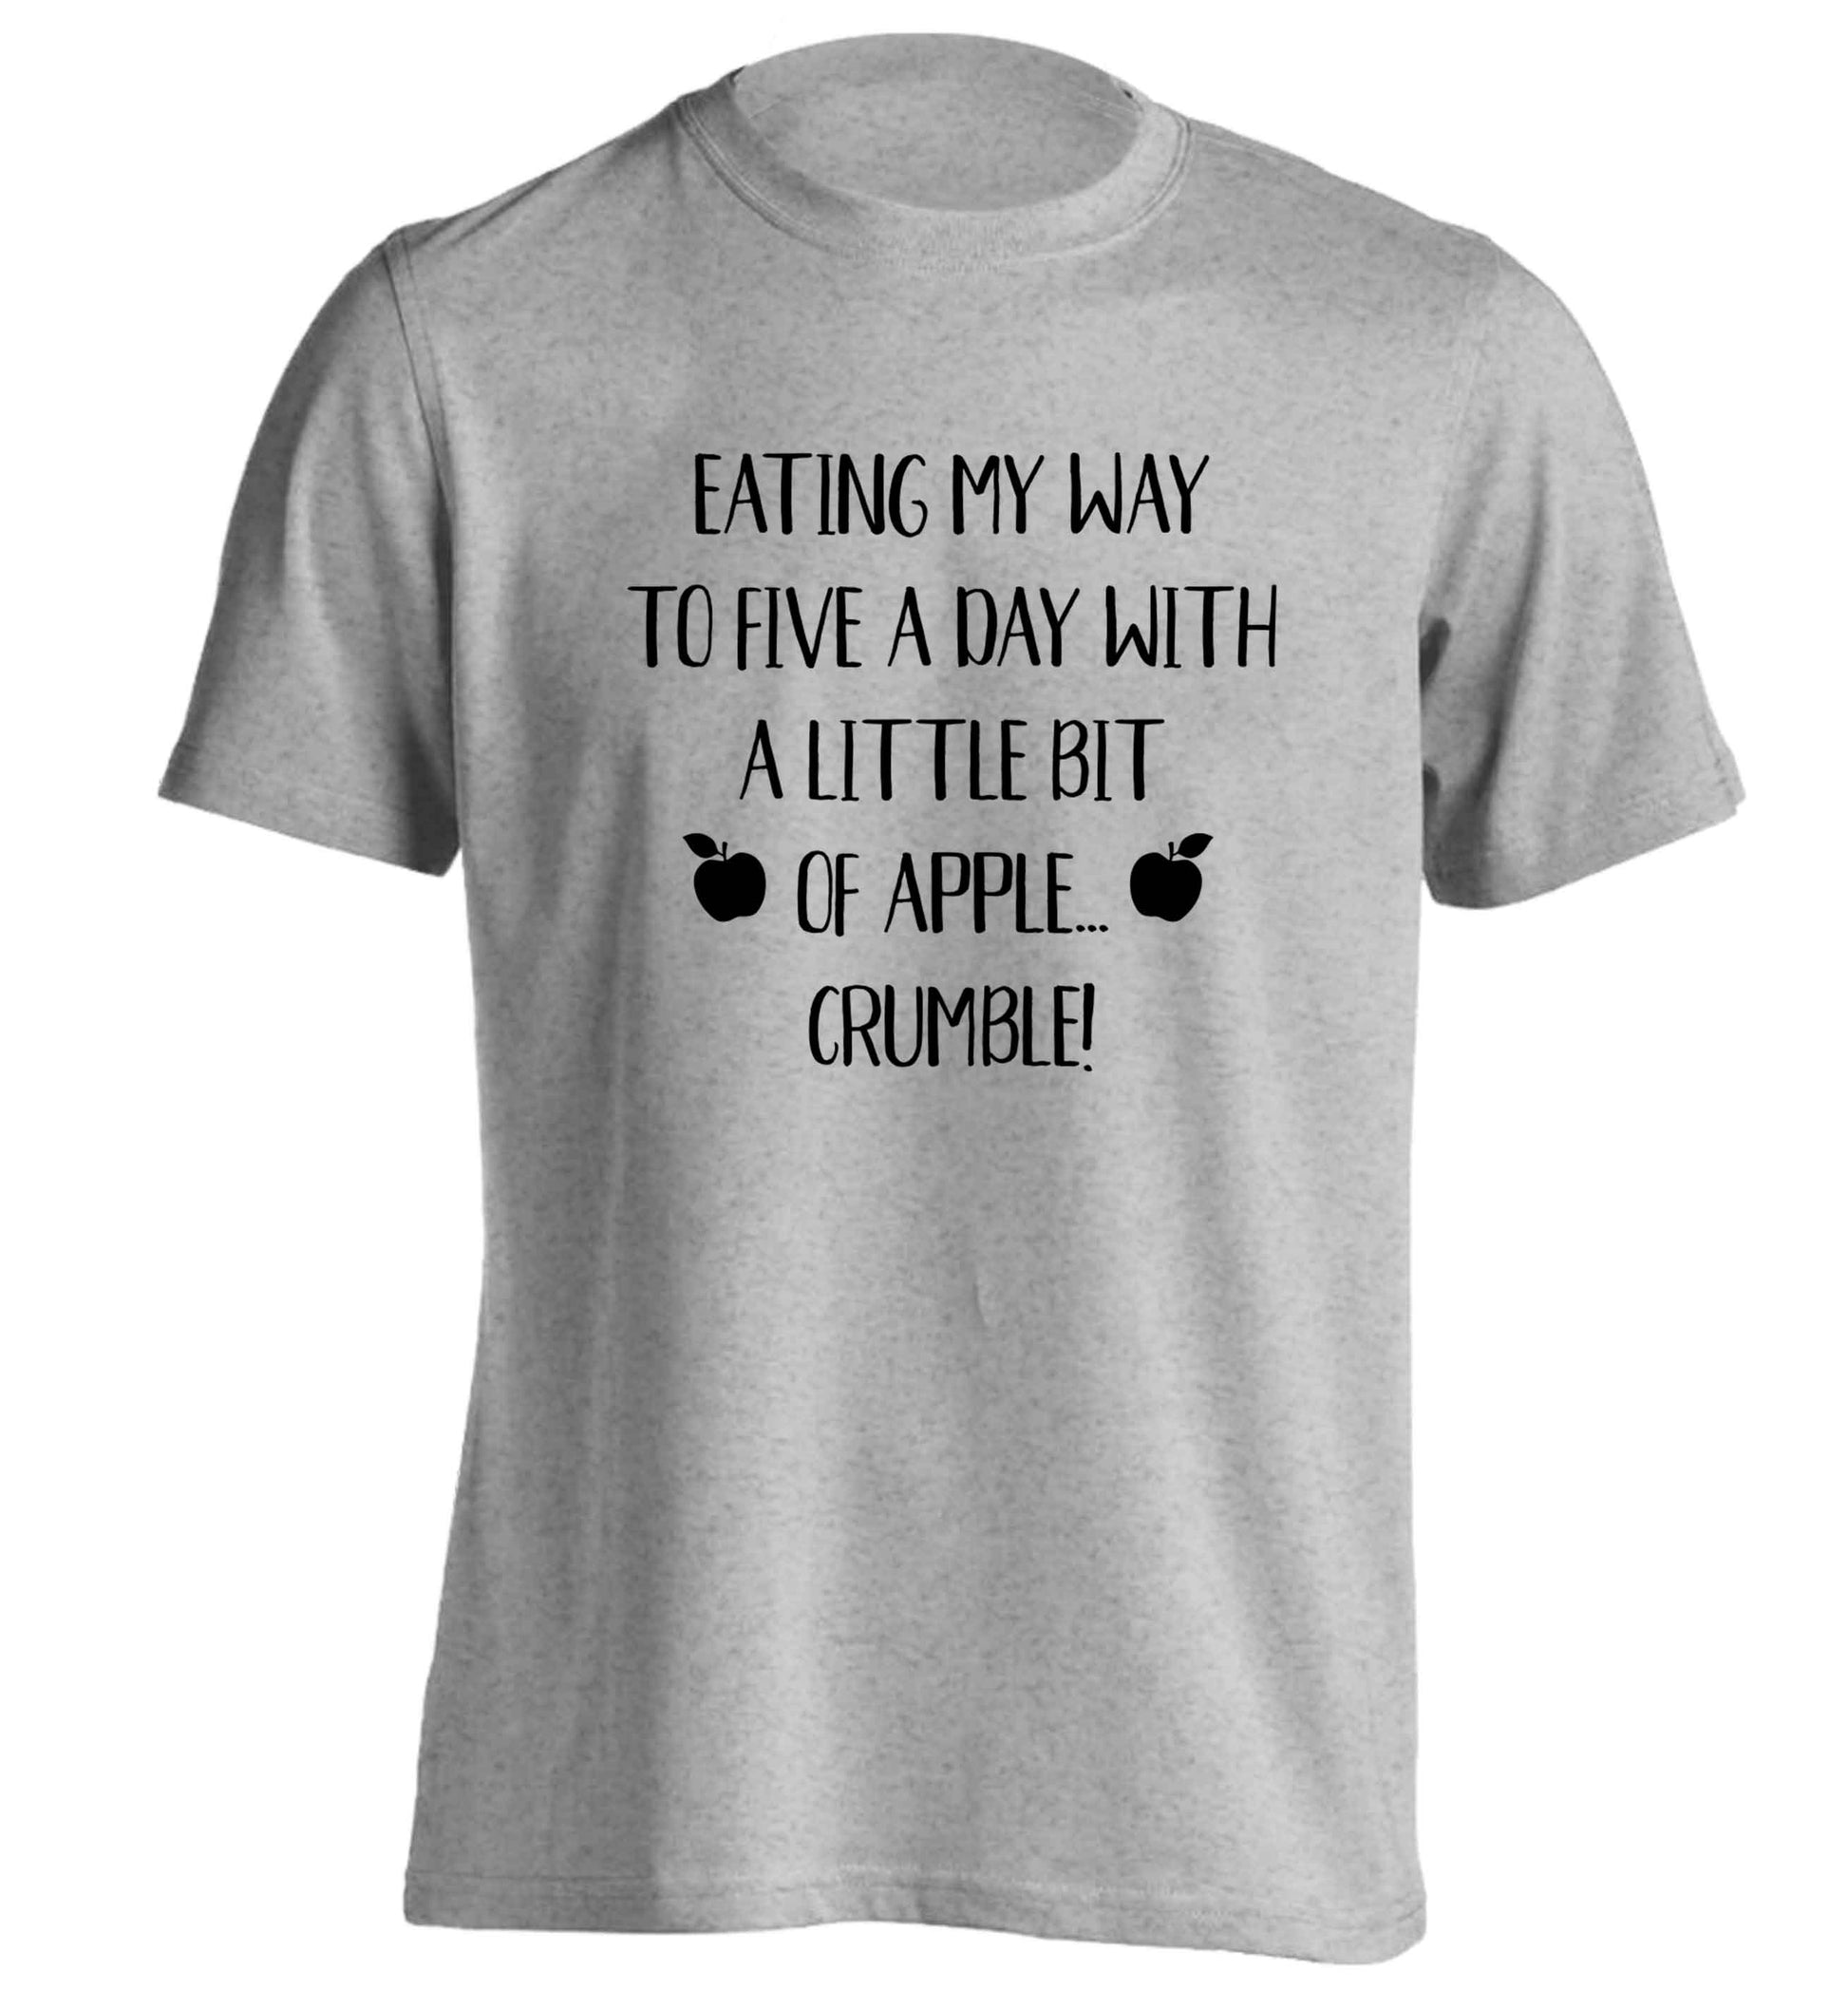 Eating my way to five a day with a little bit of apple crumble adults unisex grey Tshirt 2XL